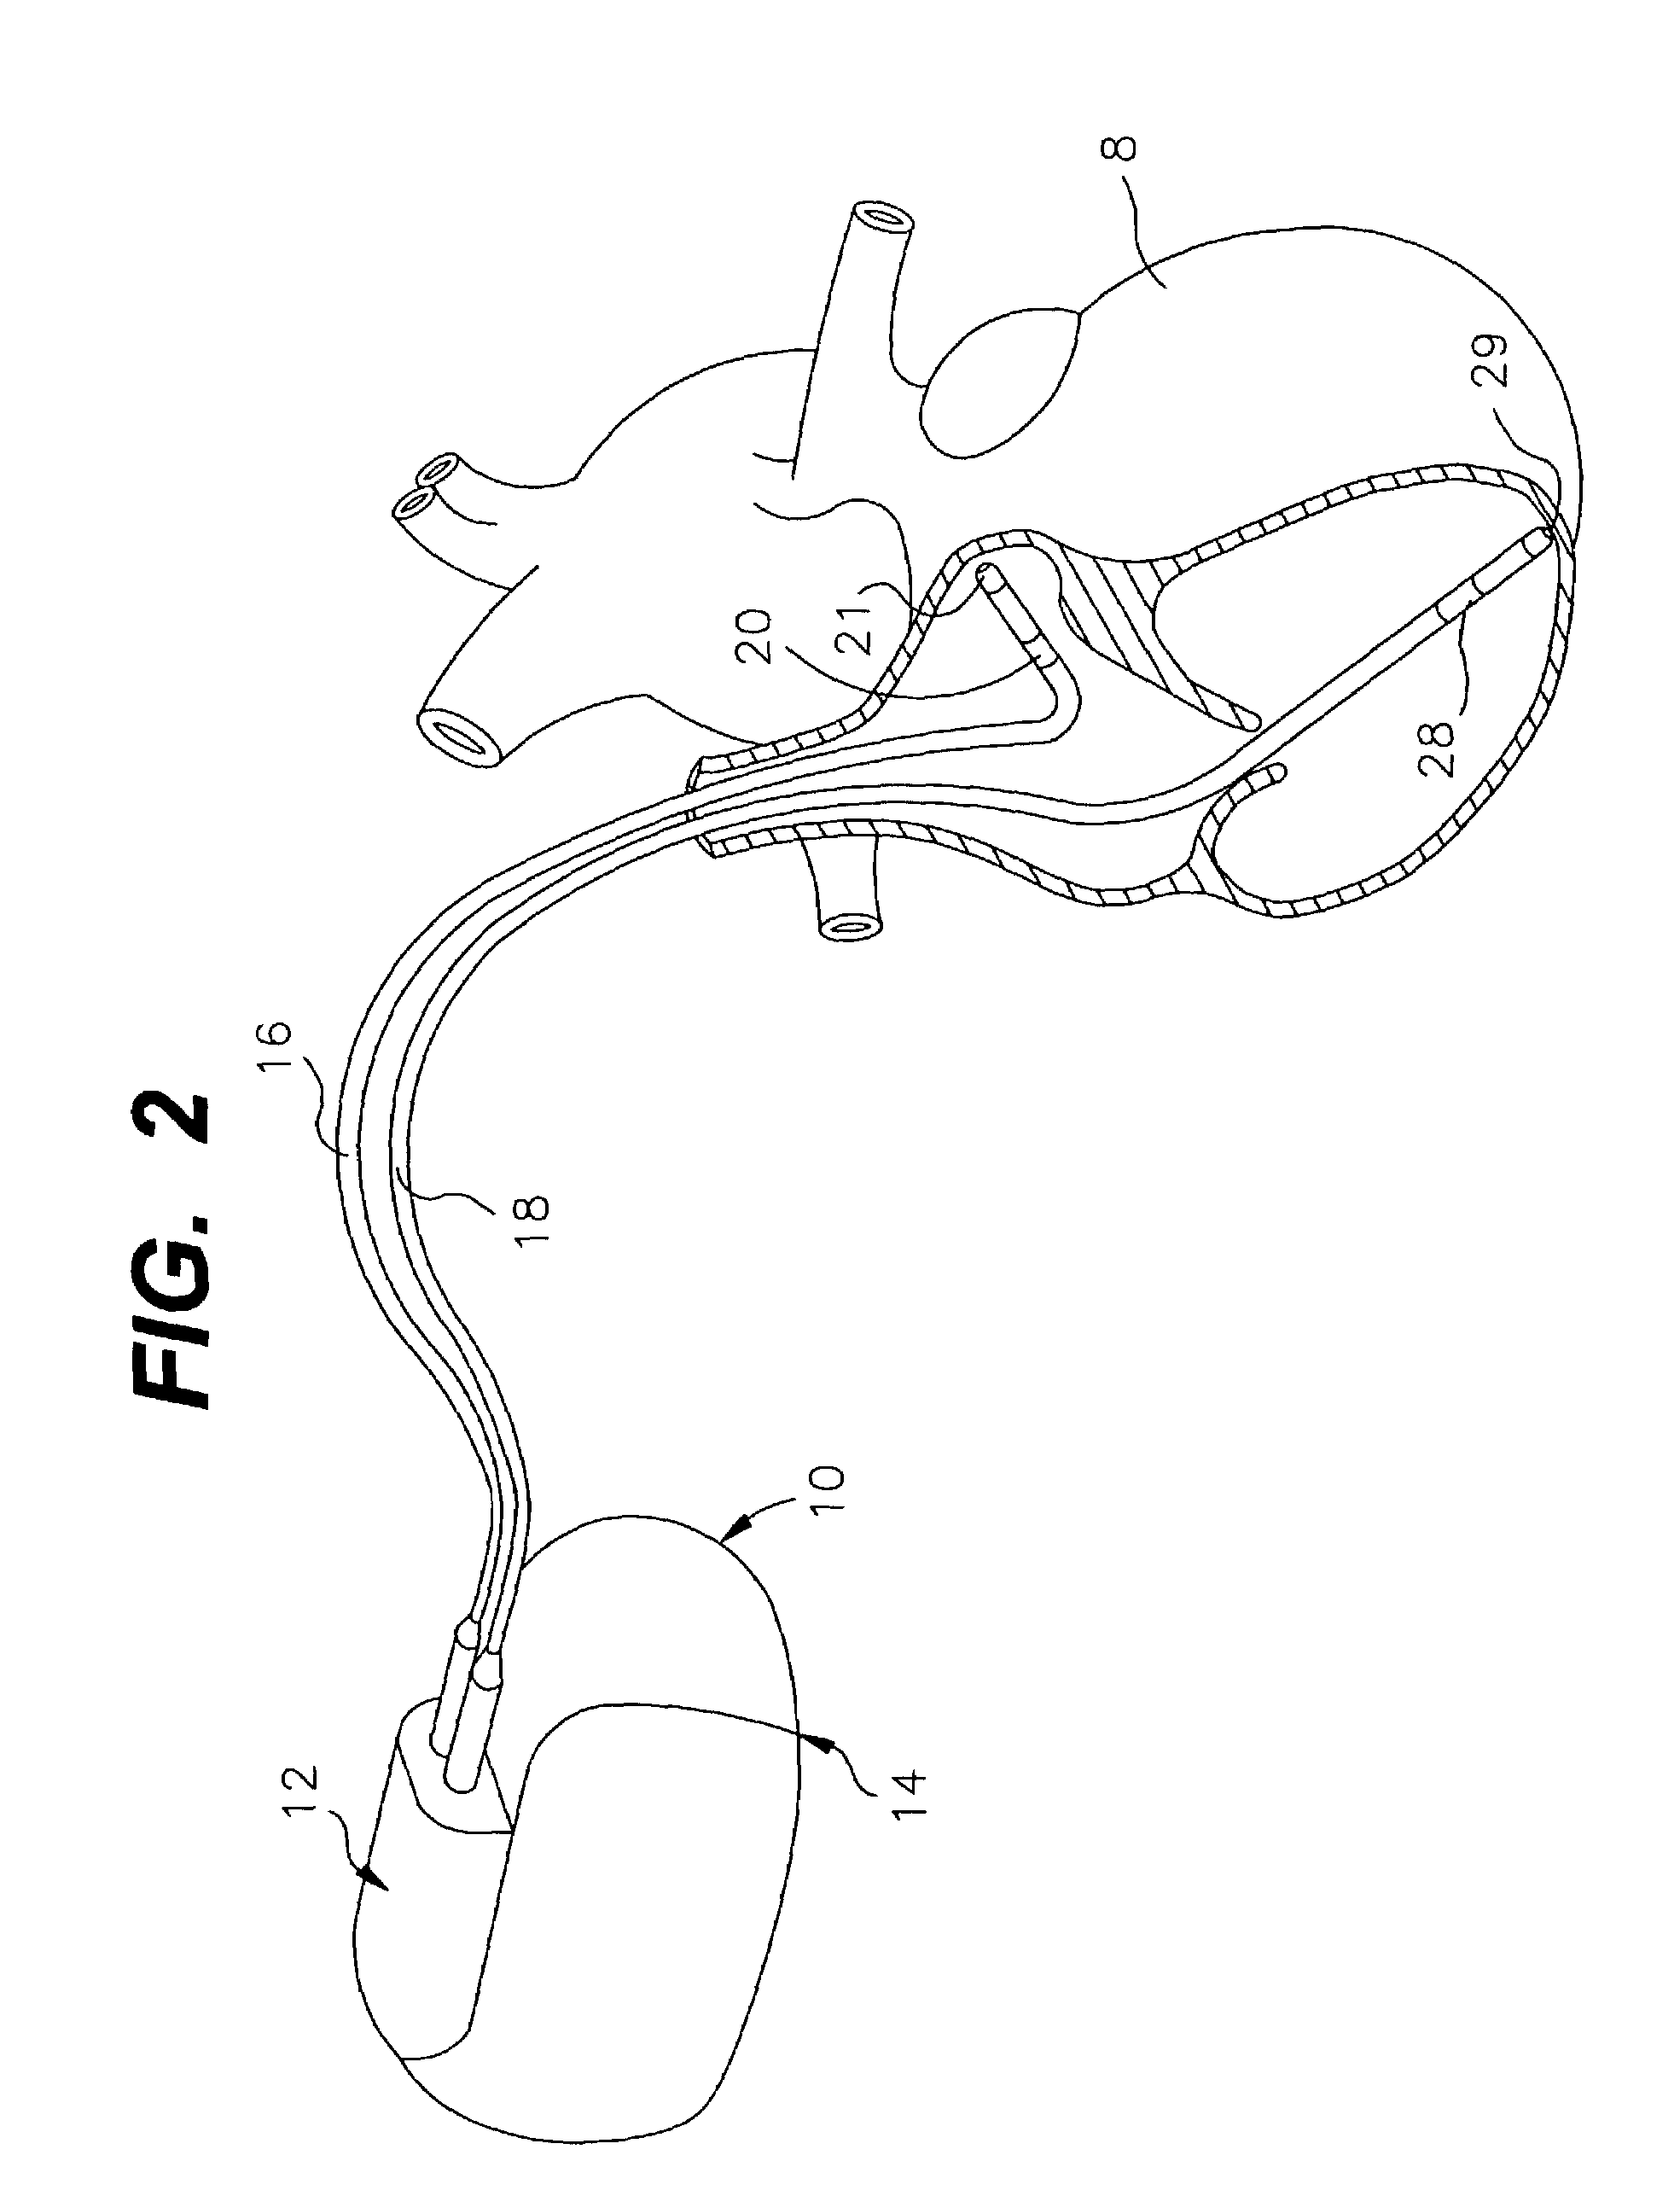 System and method for transmission of medical and like data from a patient to a dedicated internet website